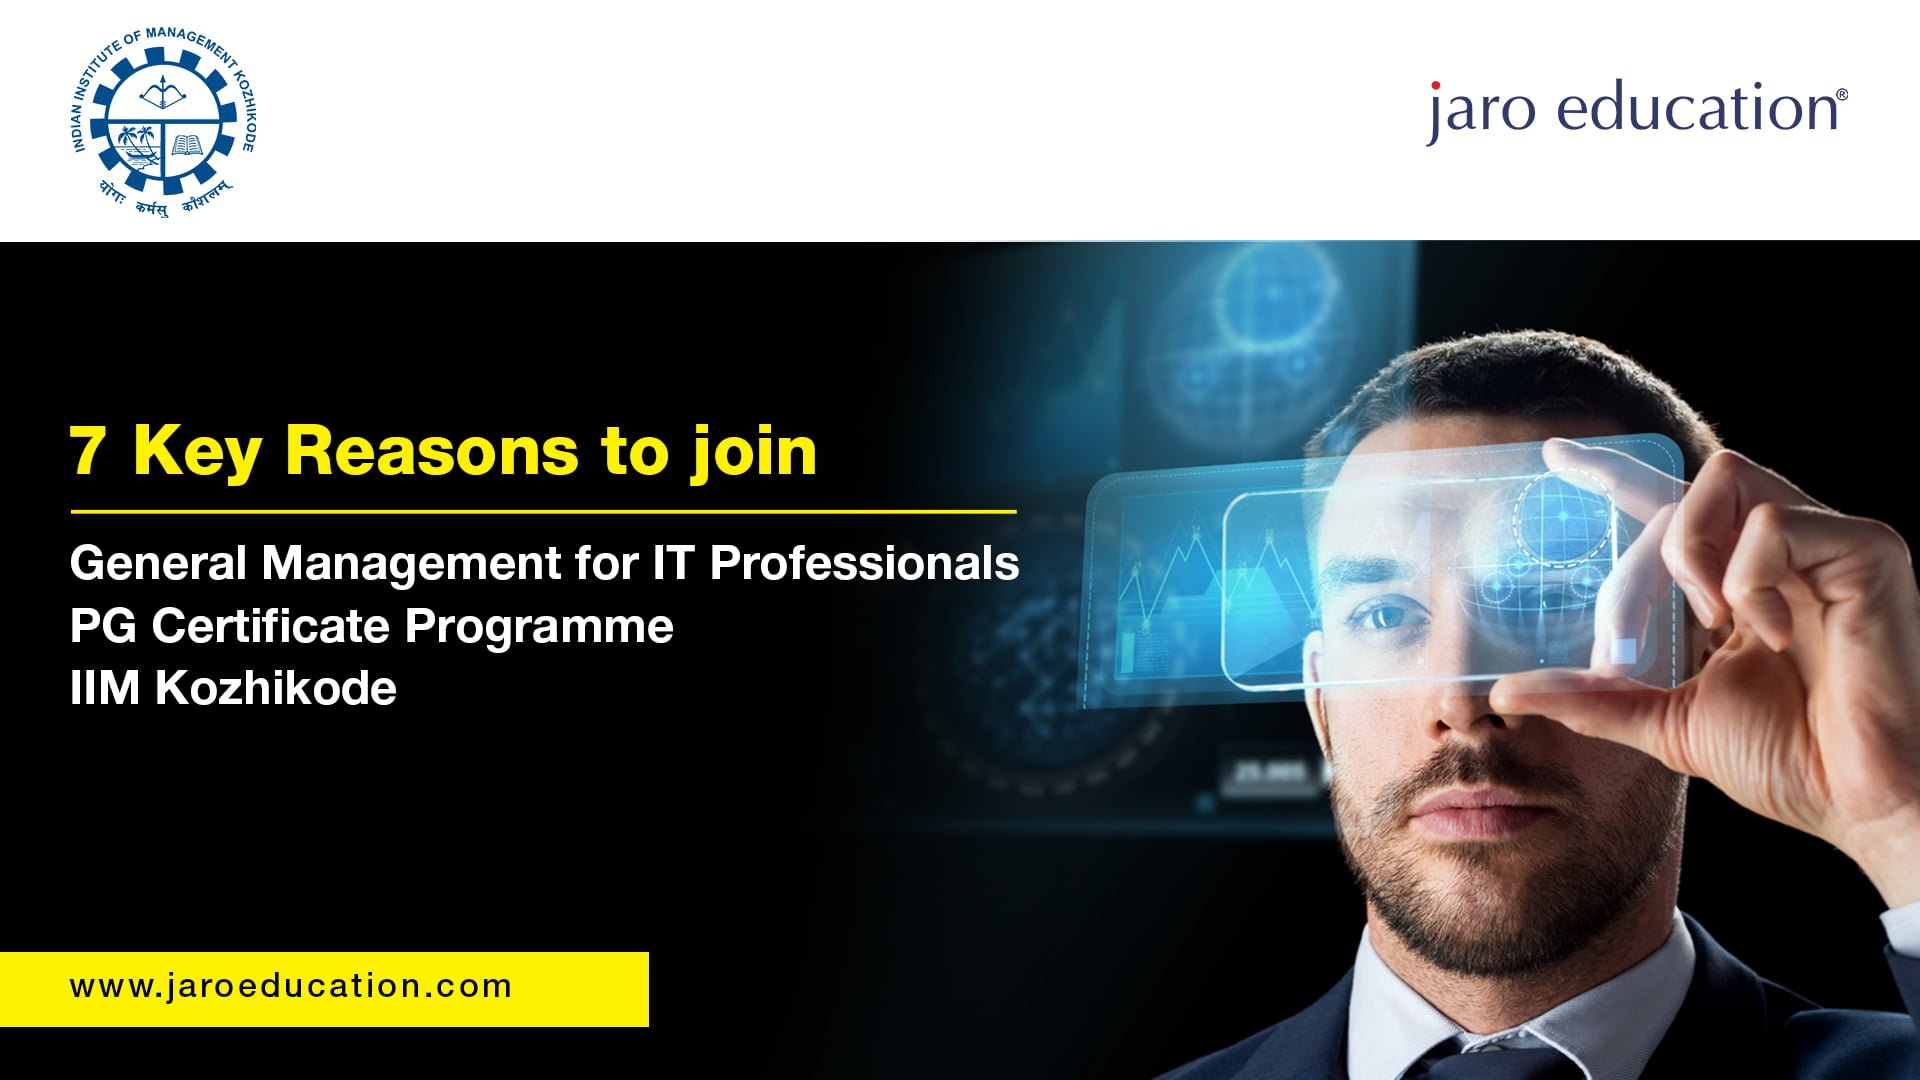 General Management for IT Professionals Certificate Programme